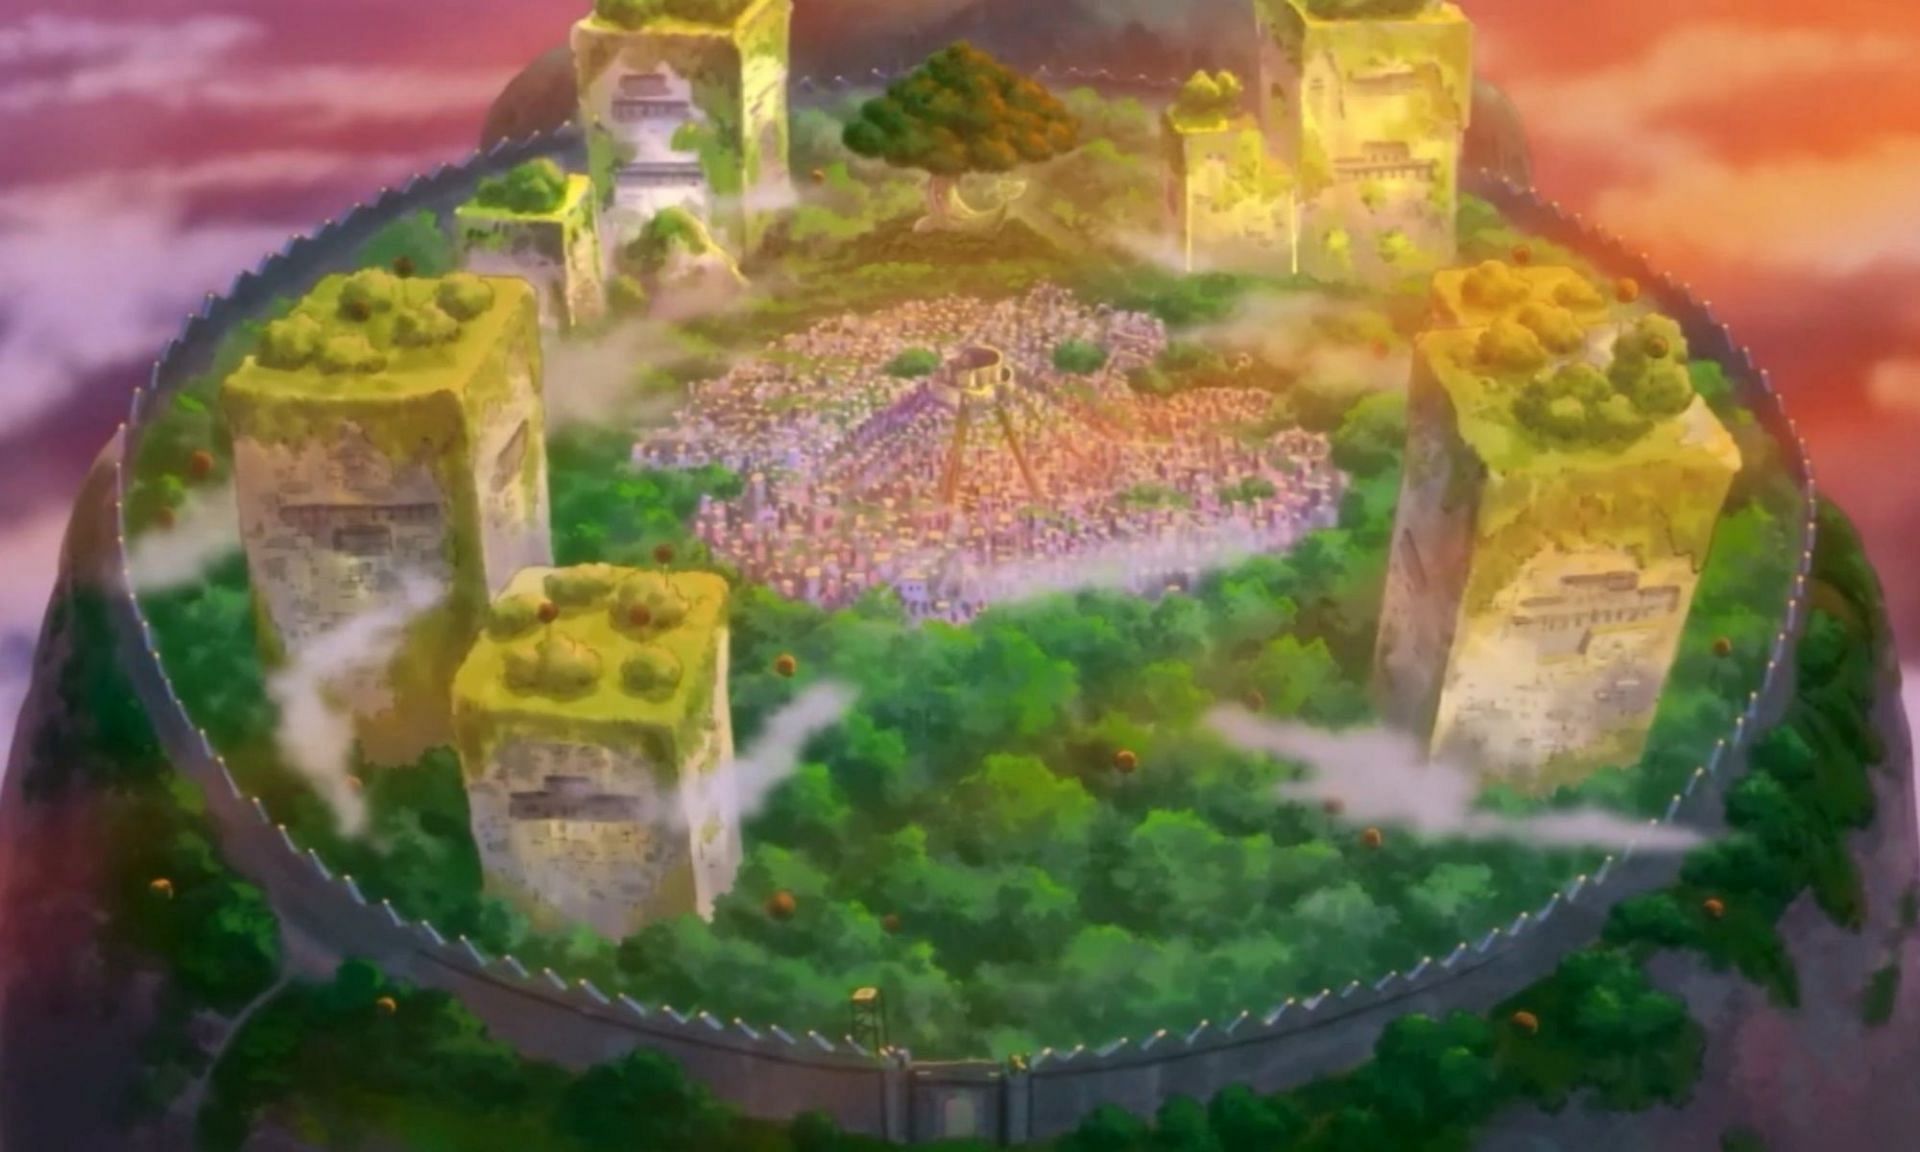 A rather unusual setting by One Piece standards (Image via Toei Animation)